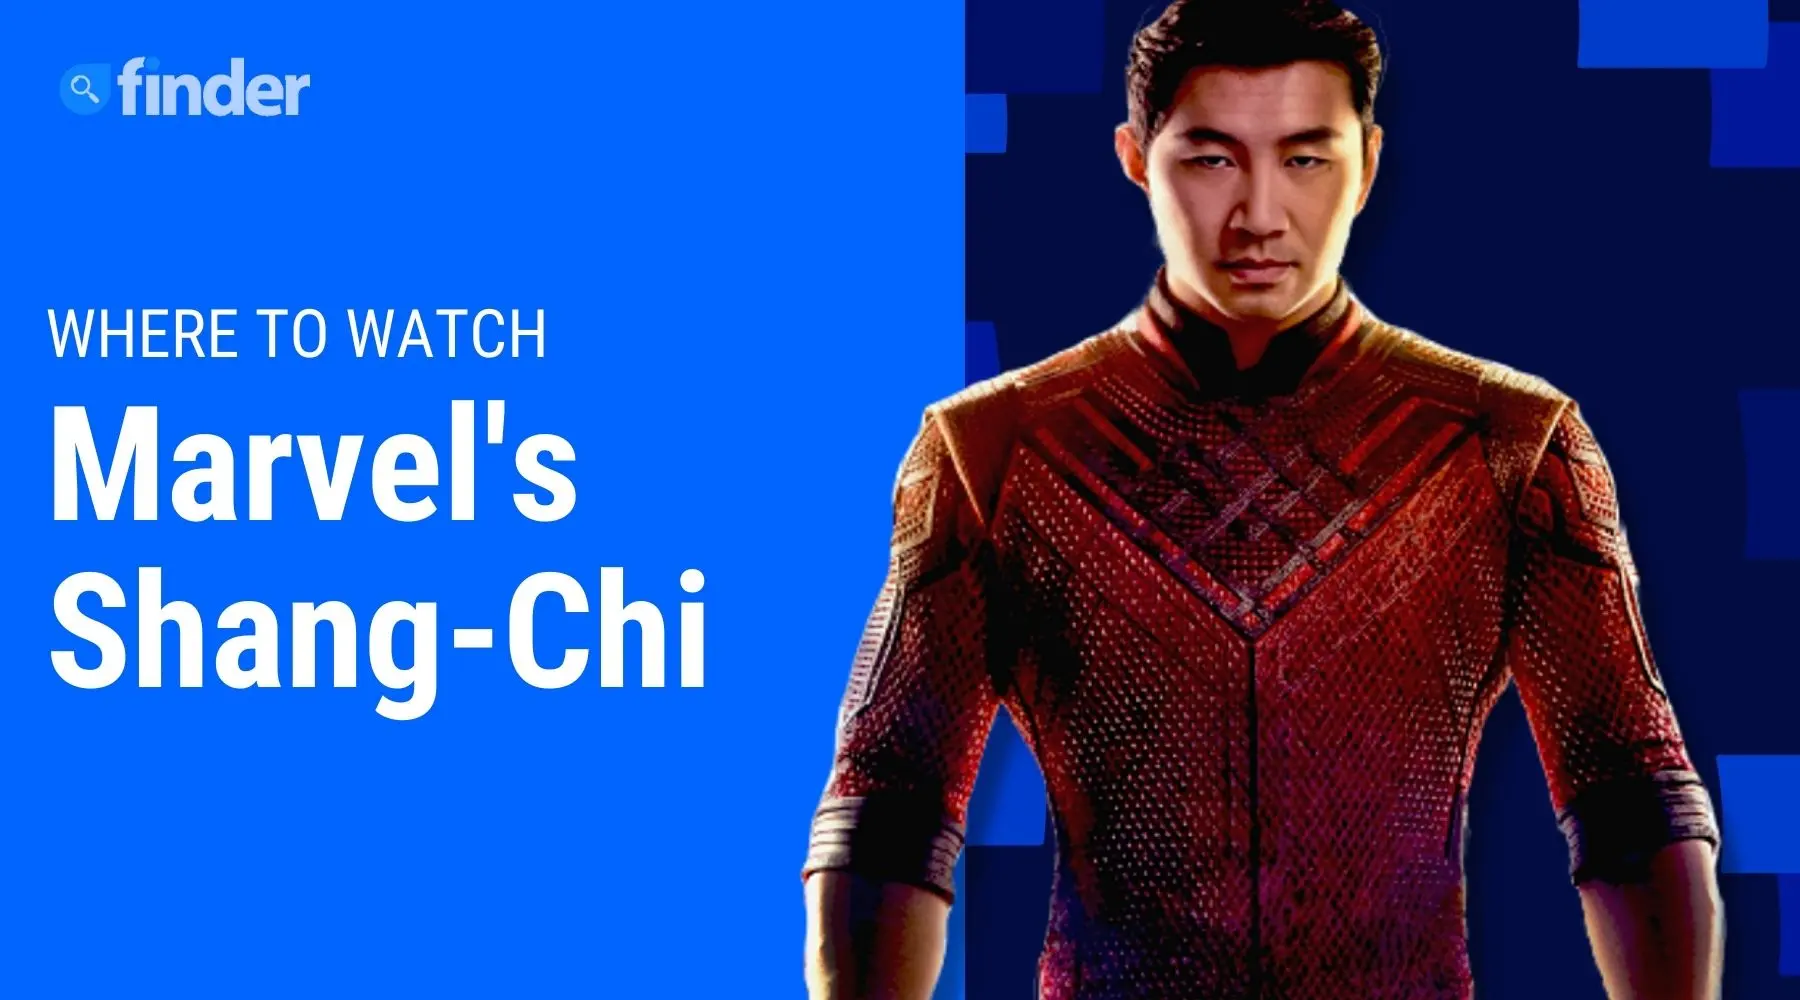 Watch shang chi online streaming